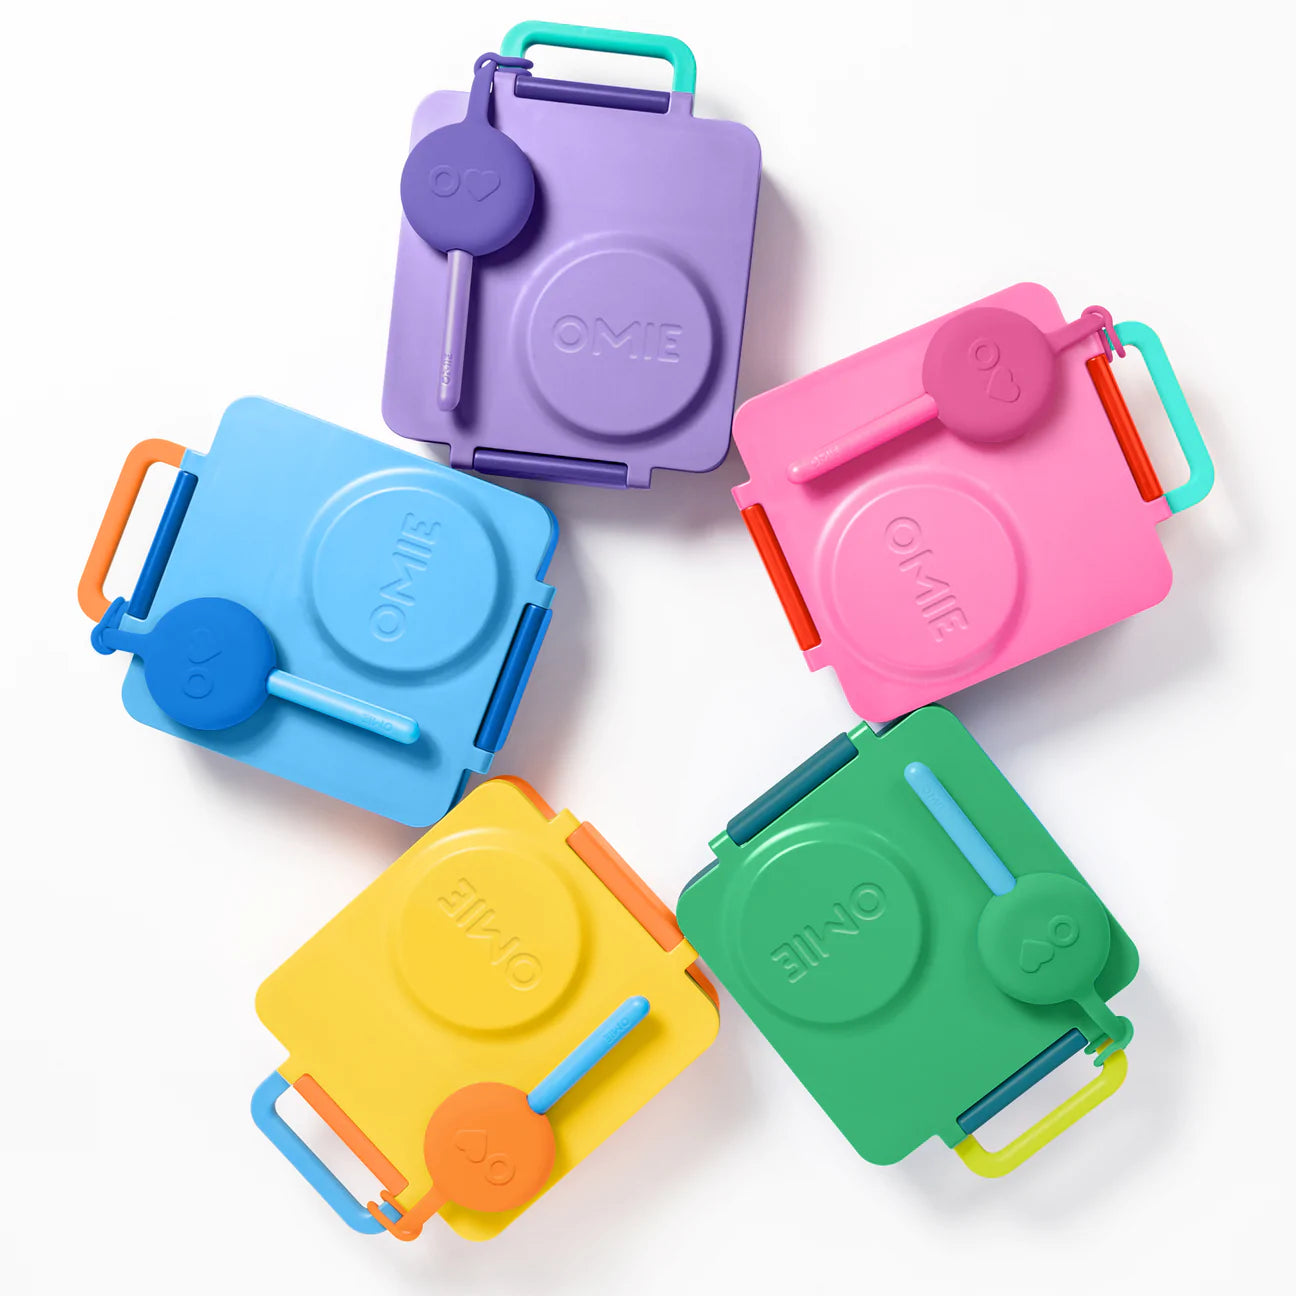 OmieBox  Assorted Colors — ARTISANS & agency